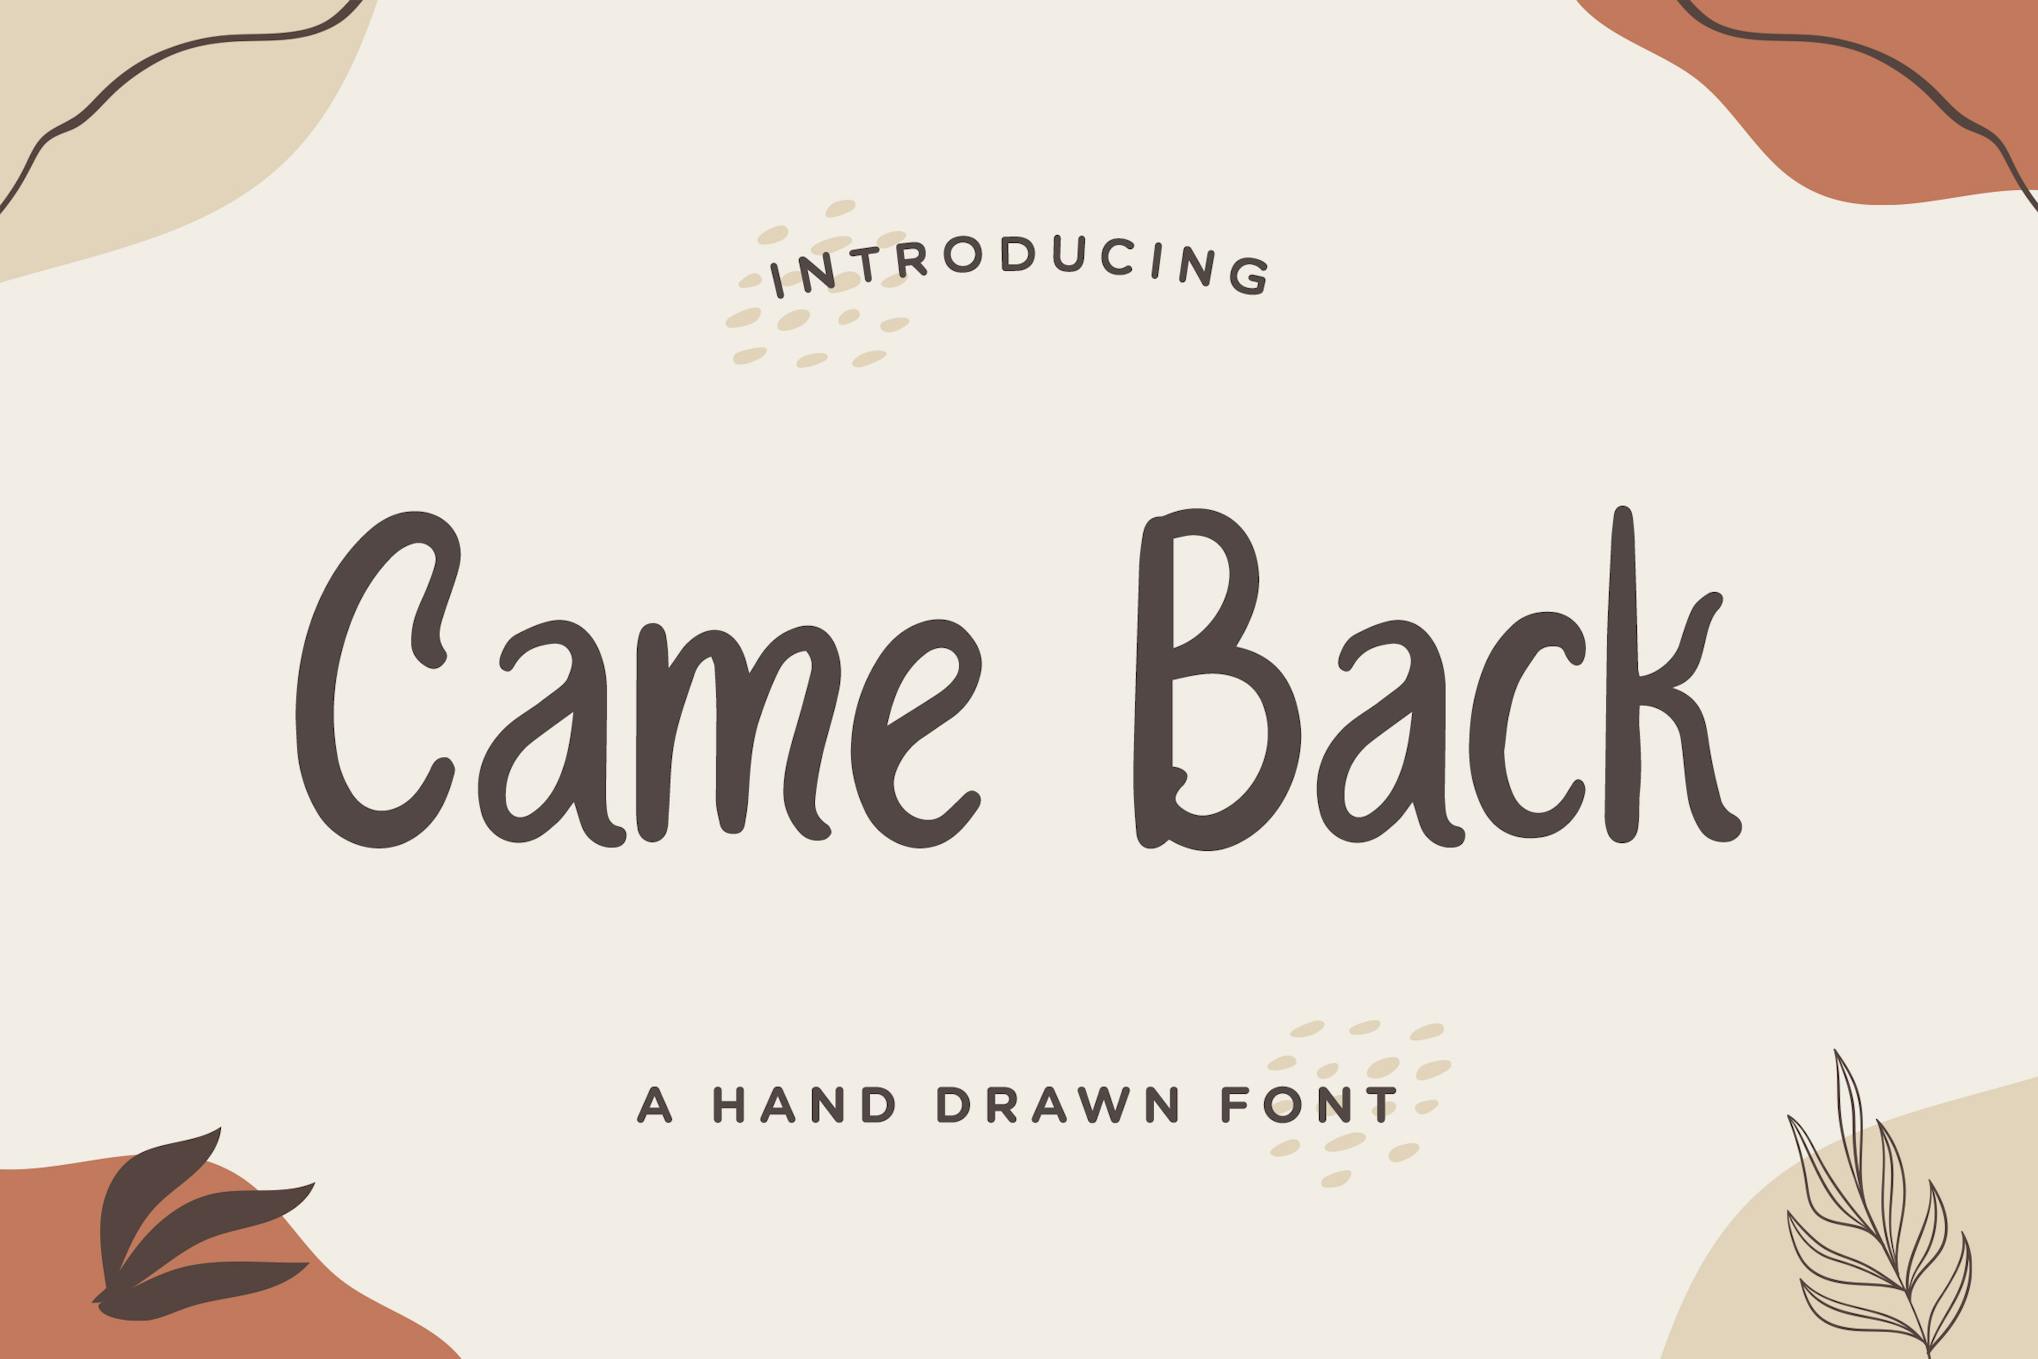 Came Back - Handwritten Spring-Themed Font